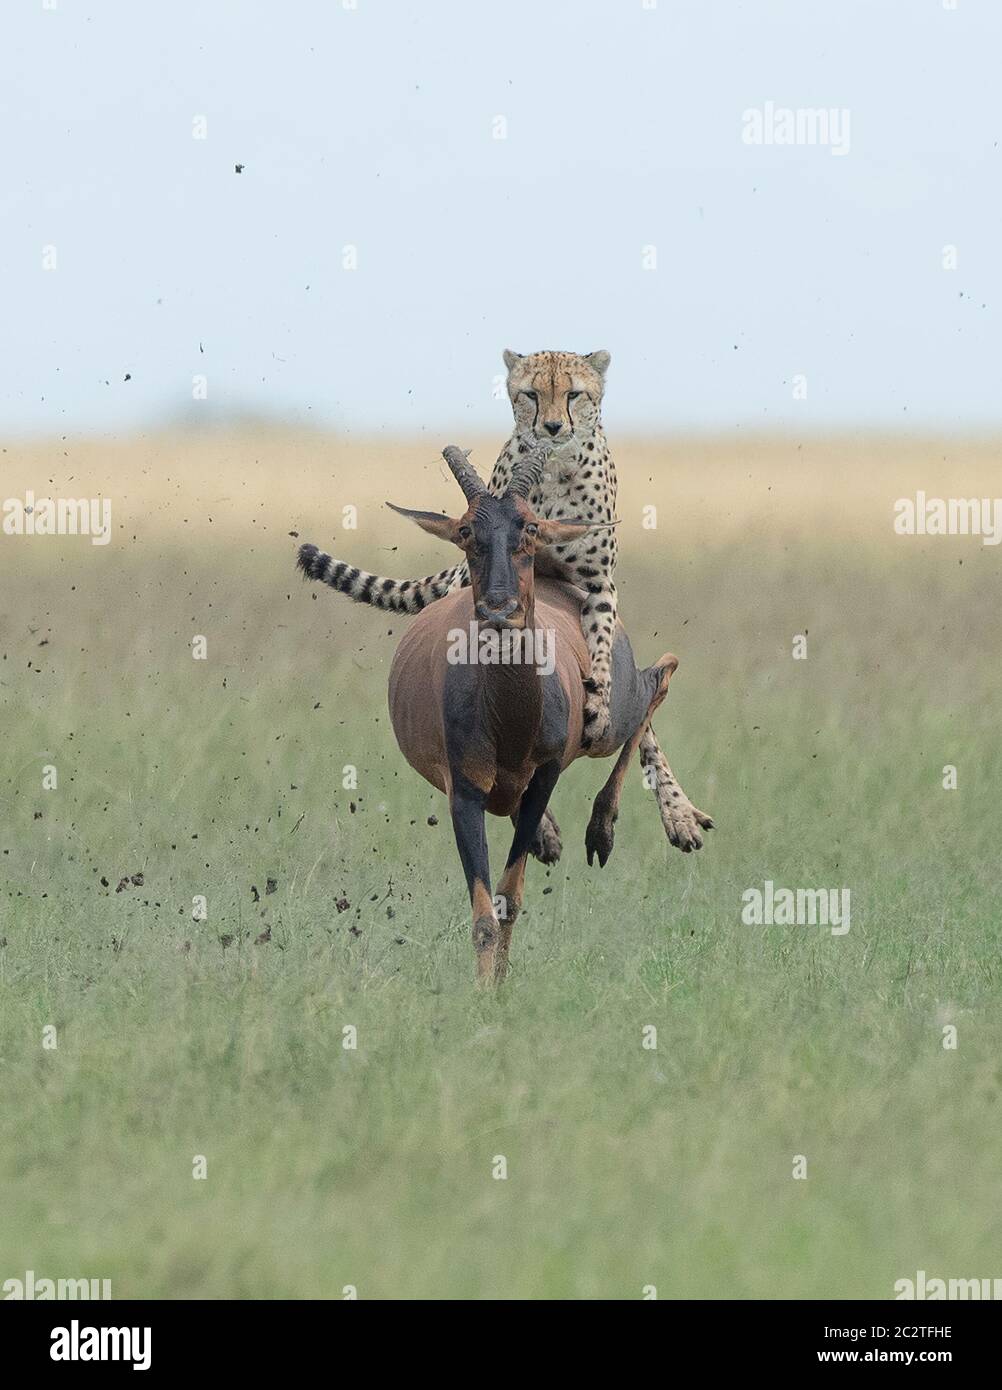 KENYA: The cheetah looks the epitome of cool as it rides the back of the visibly terrified antelope. AMAZING photos show a cheetah RIDING ON TOP of a Stock Photo